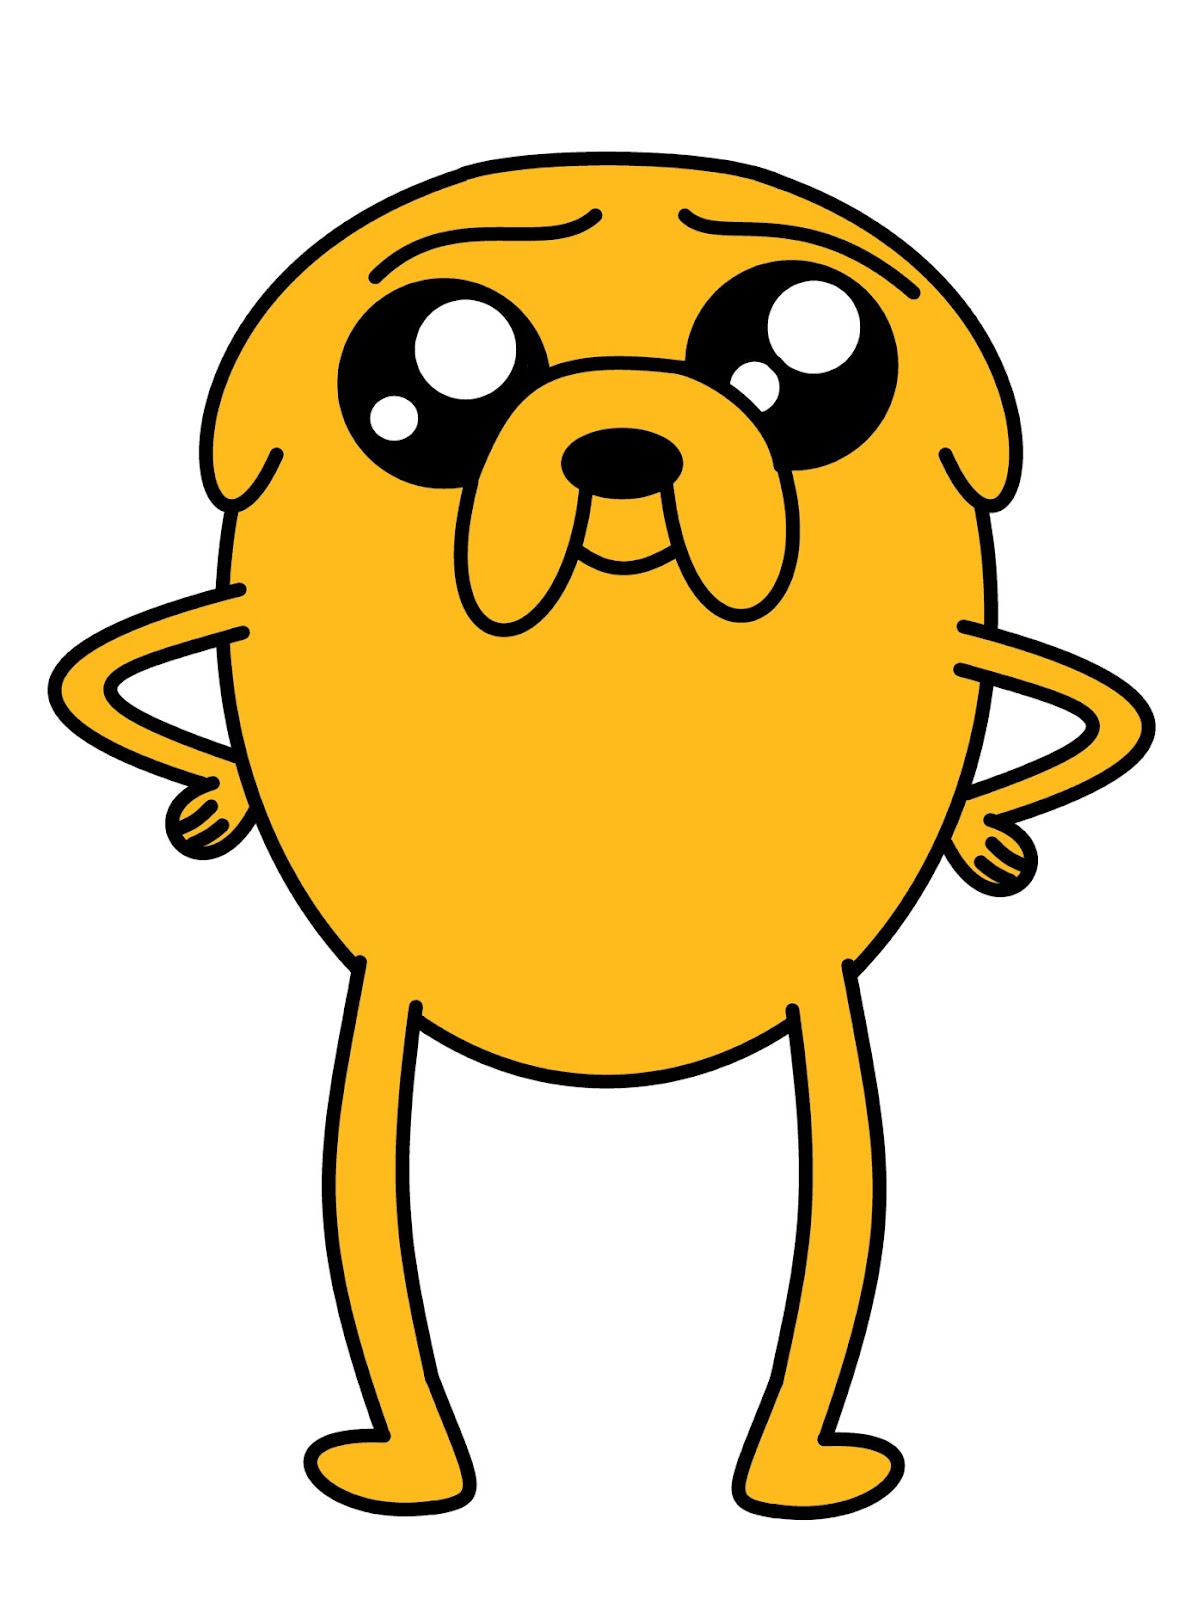 How To Draw Cartoons: Jake The Dog